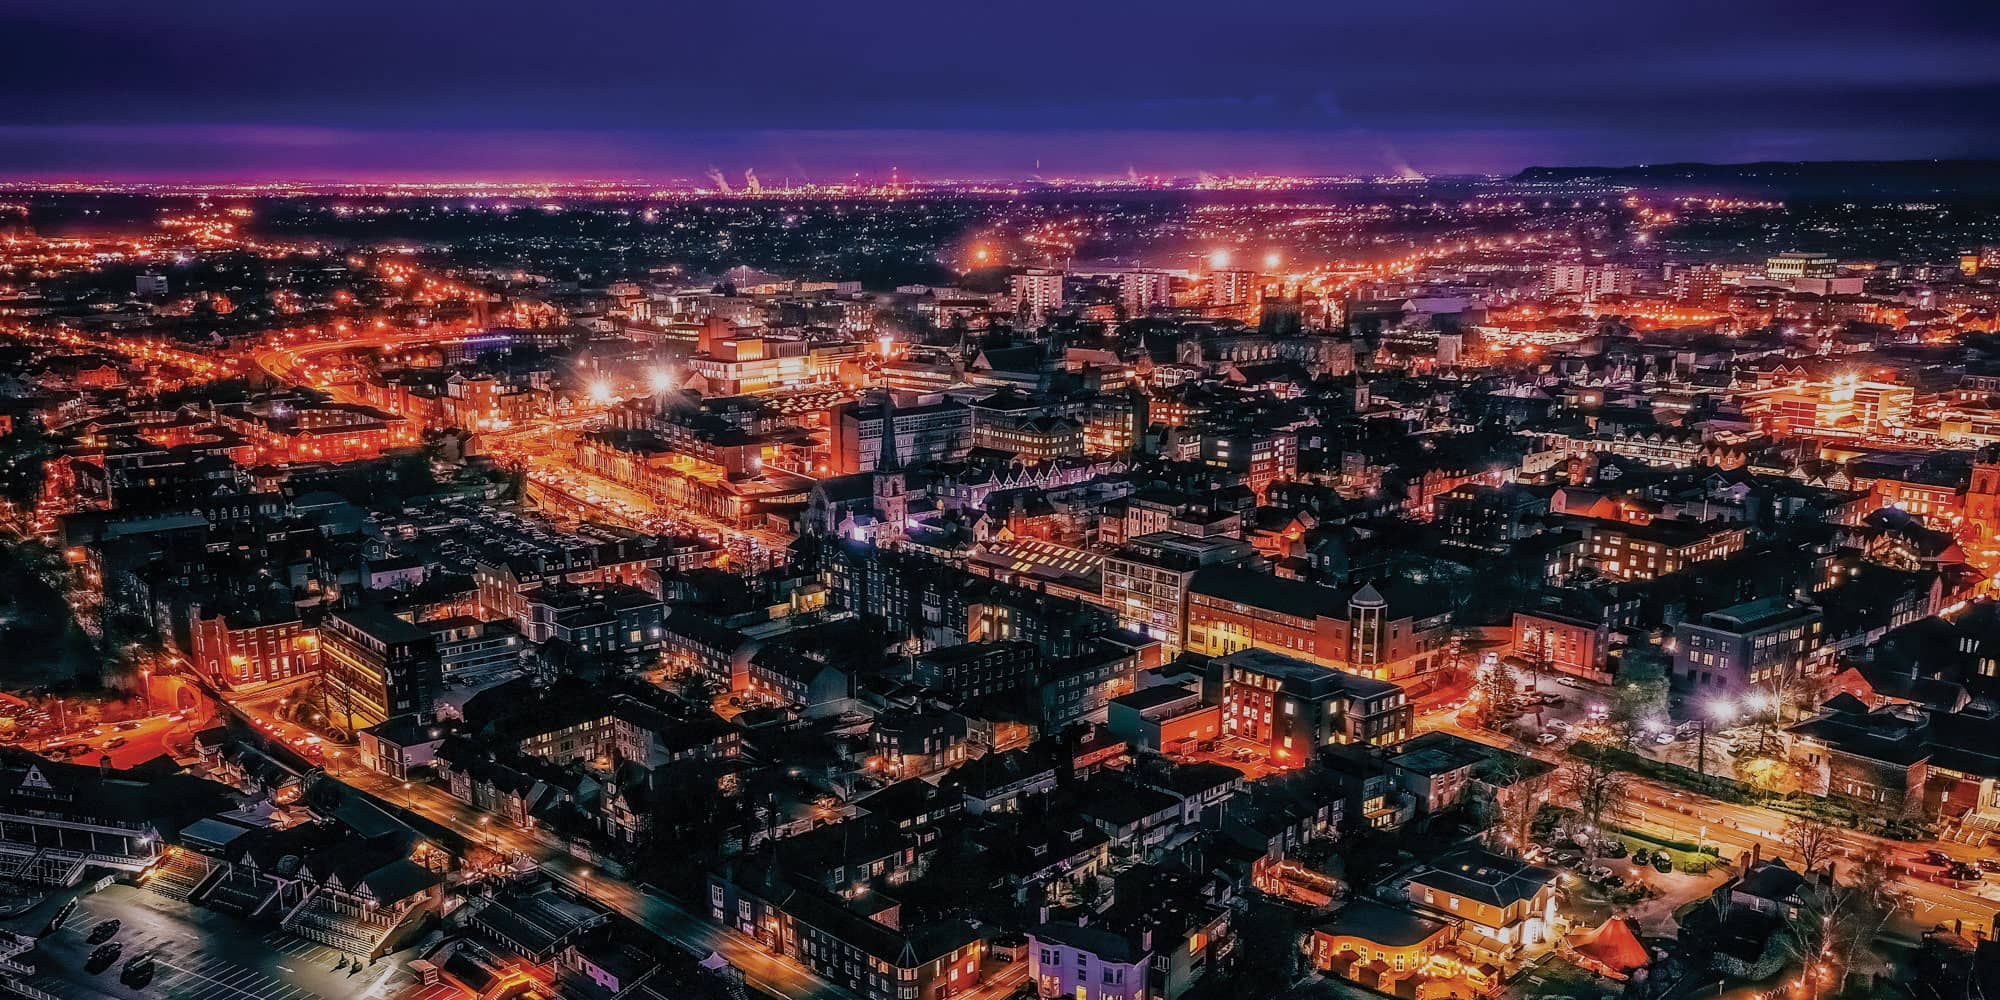 Aerial shot of Chester at night